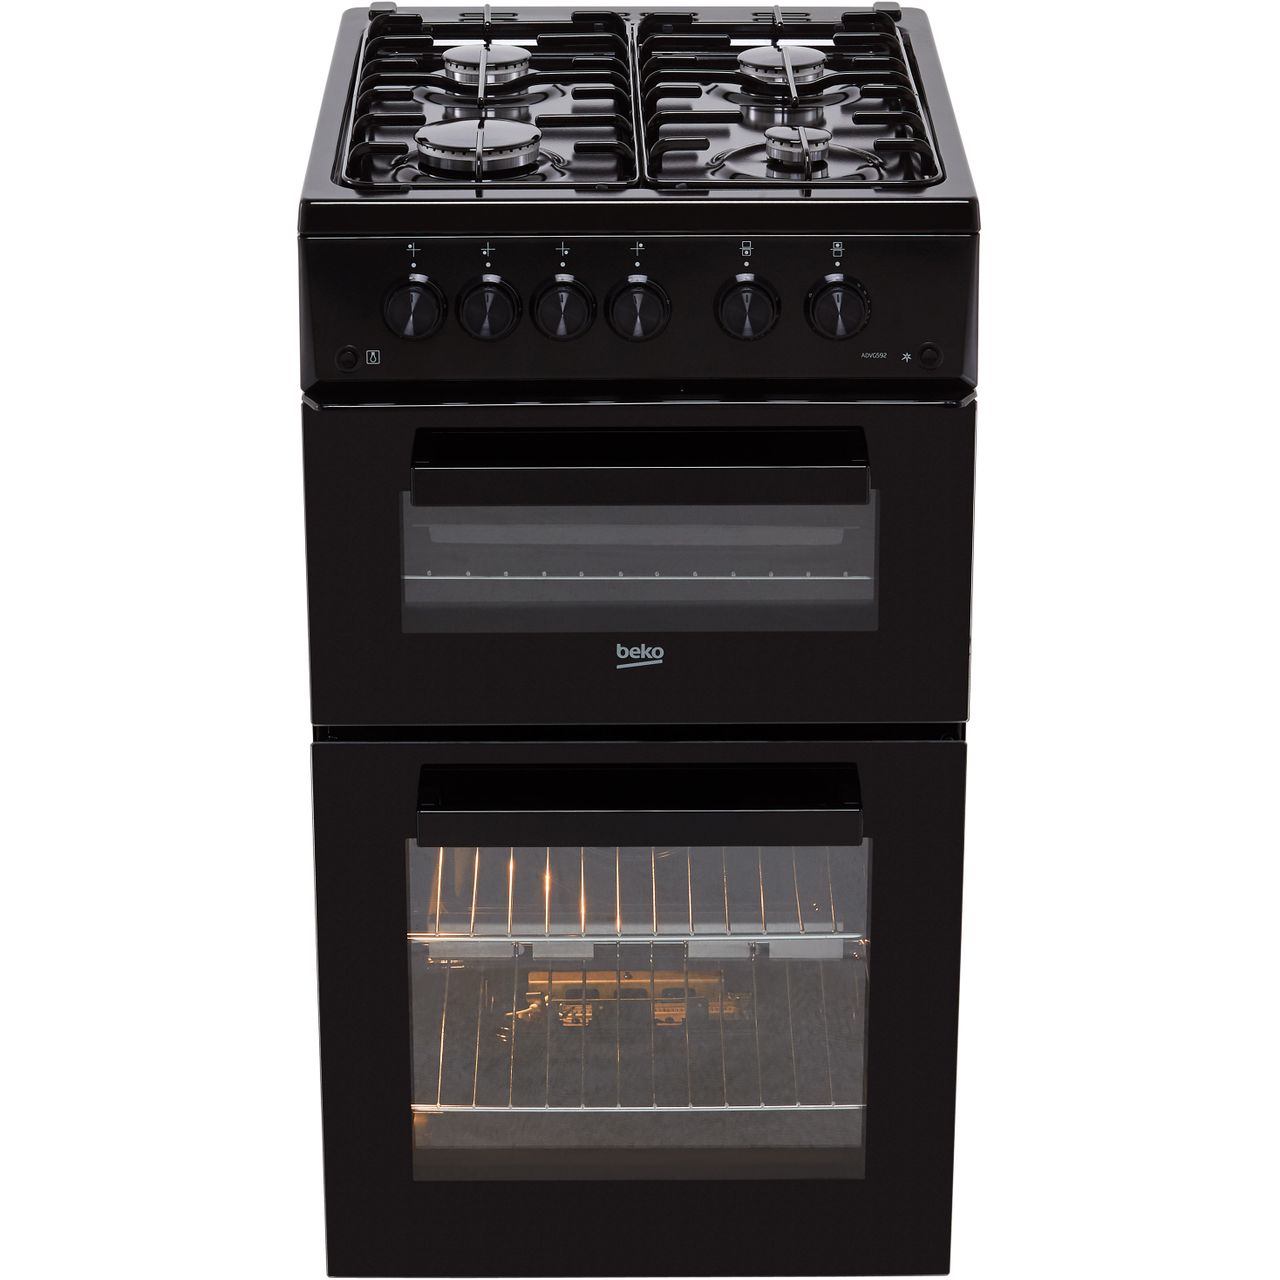 Beko ADVG592K 50cm Gas Cooker with Full Width Gas Grill Review